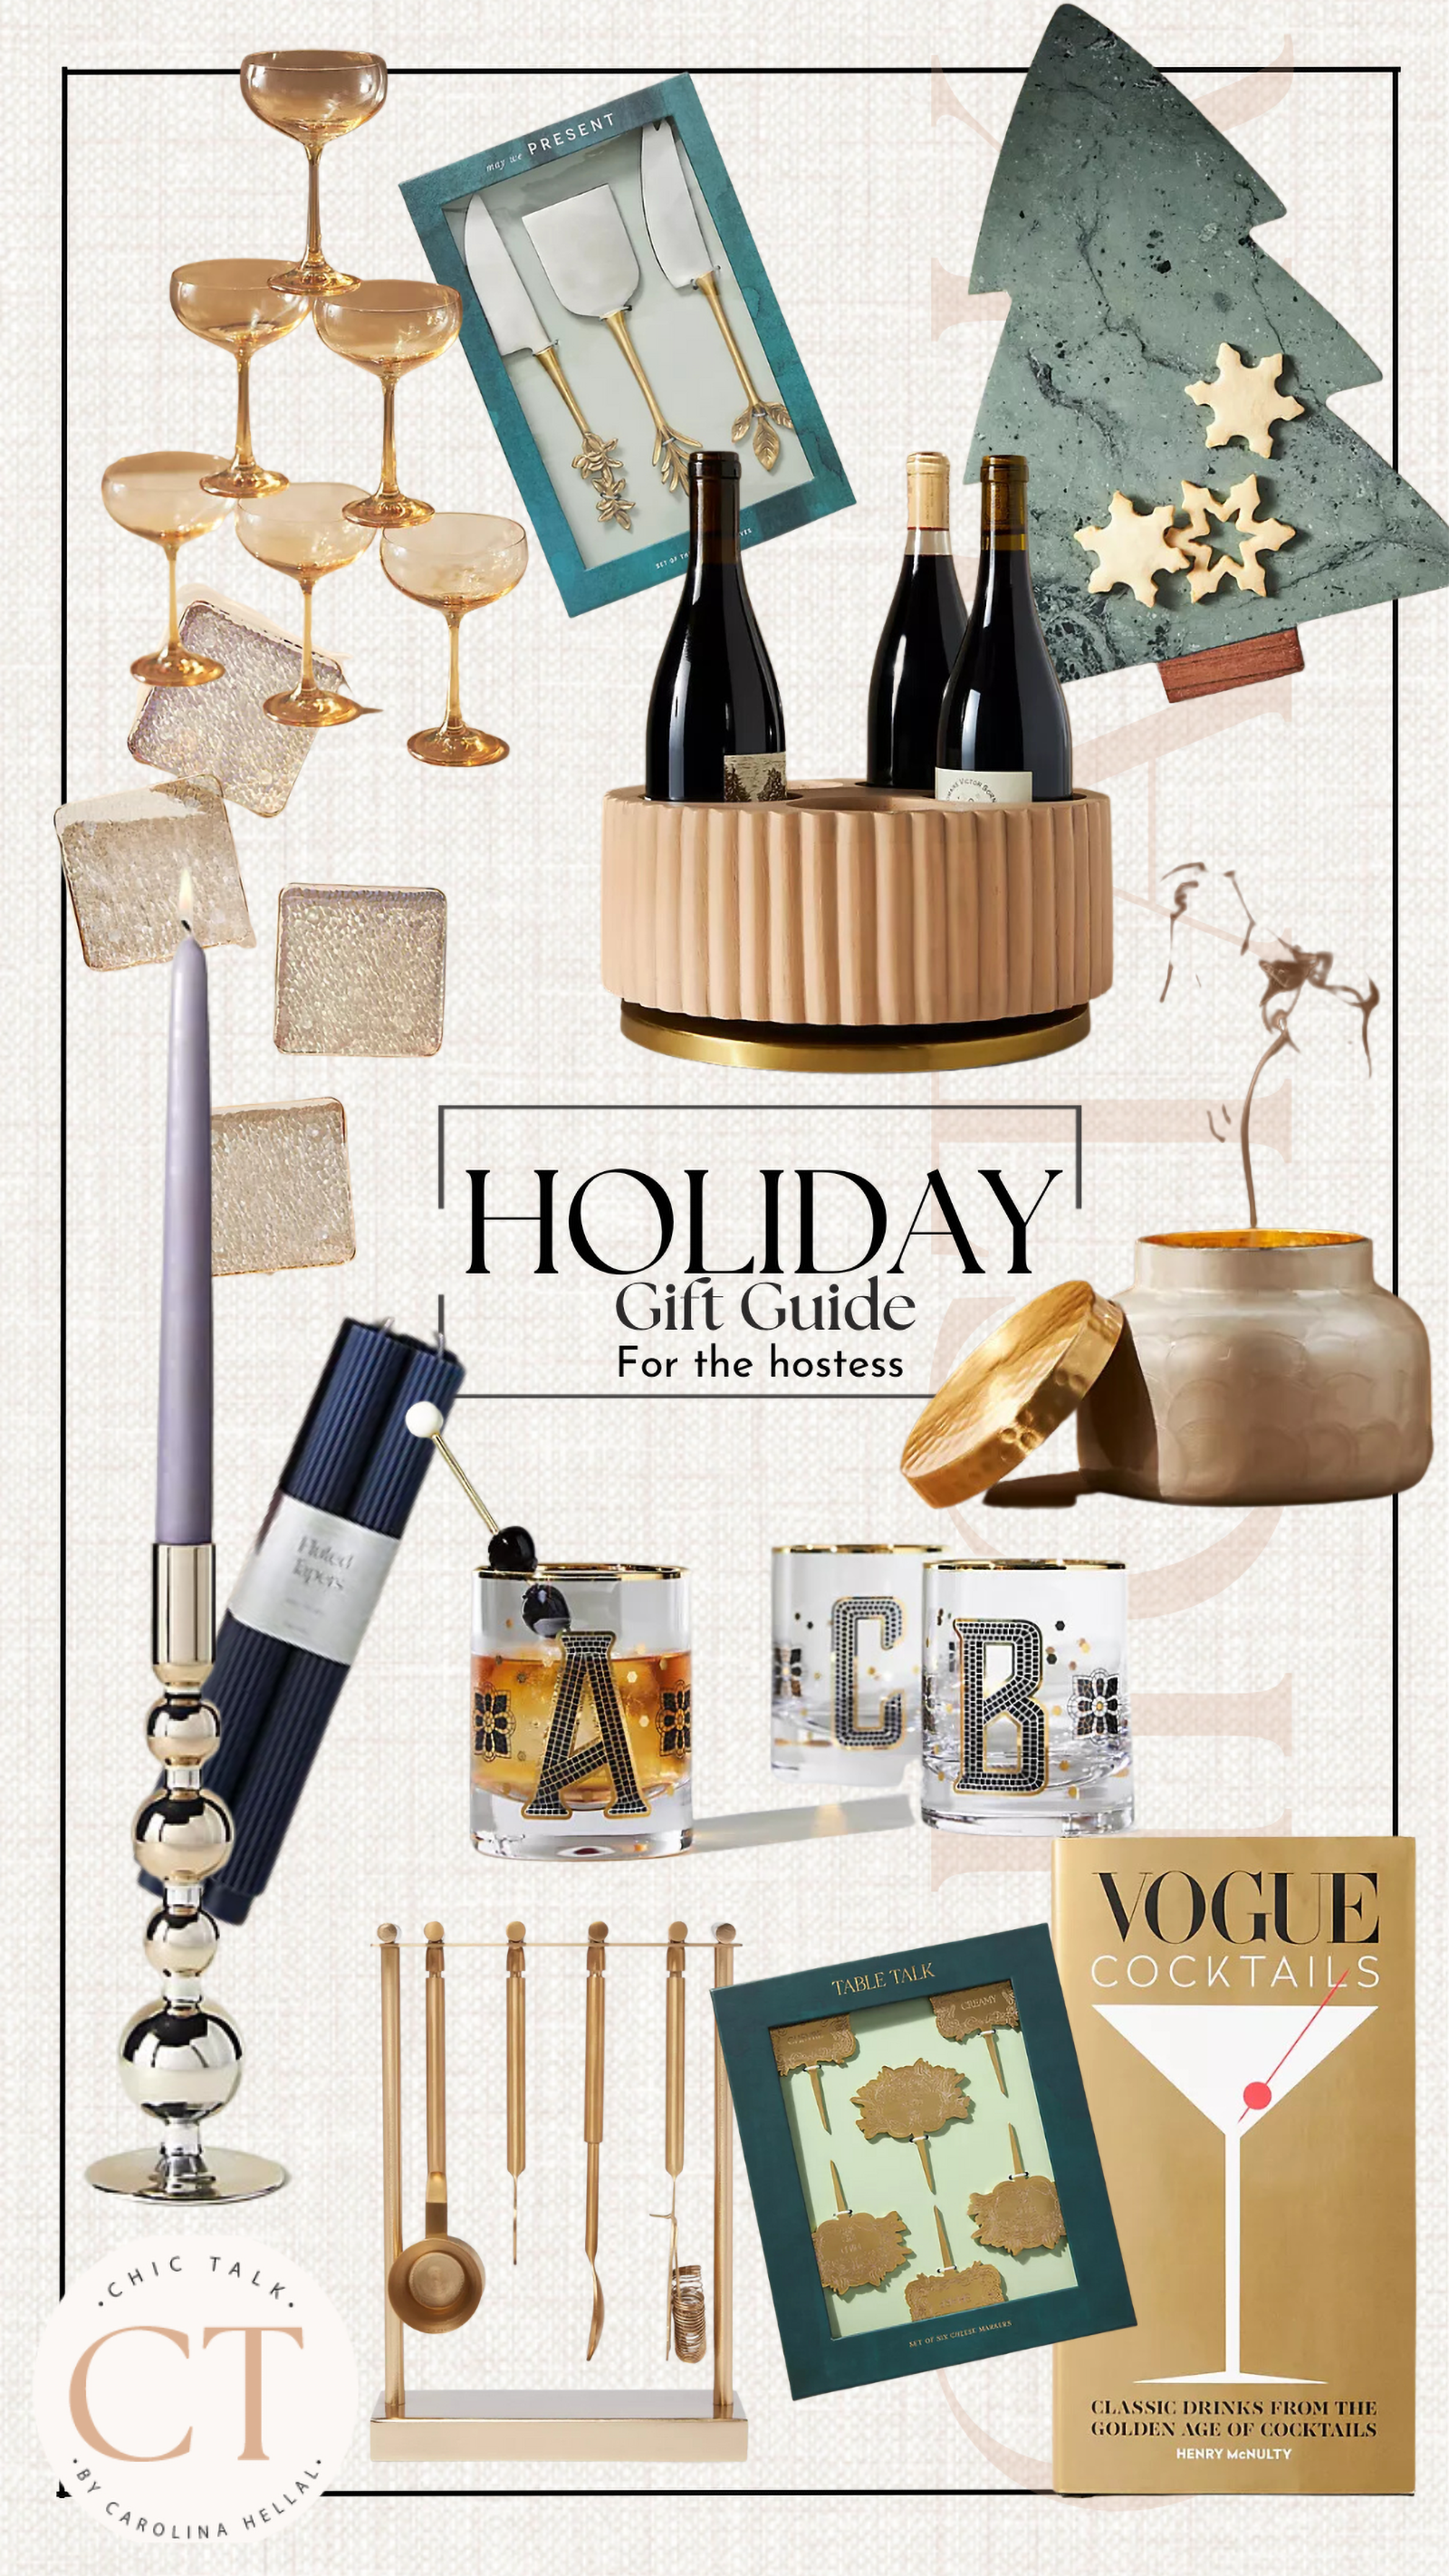 HOLIDAY GIFT GUIDE FOR THE HOSTESS CHIC TALK